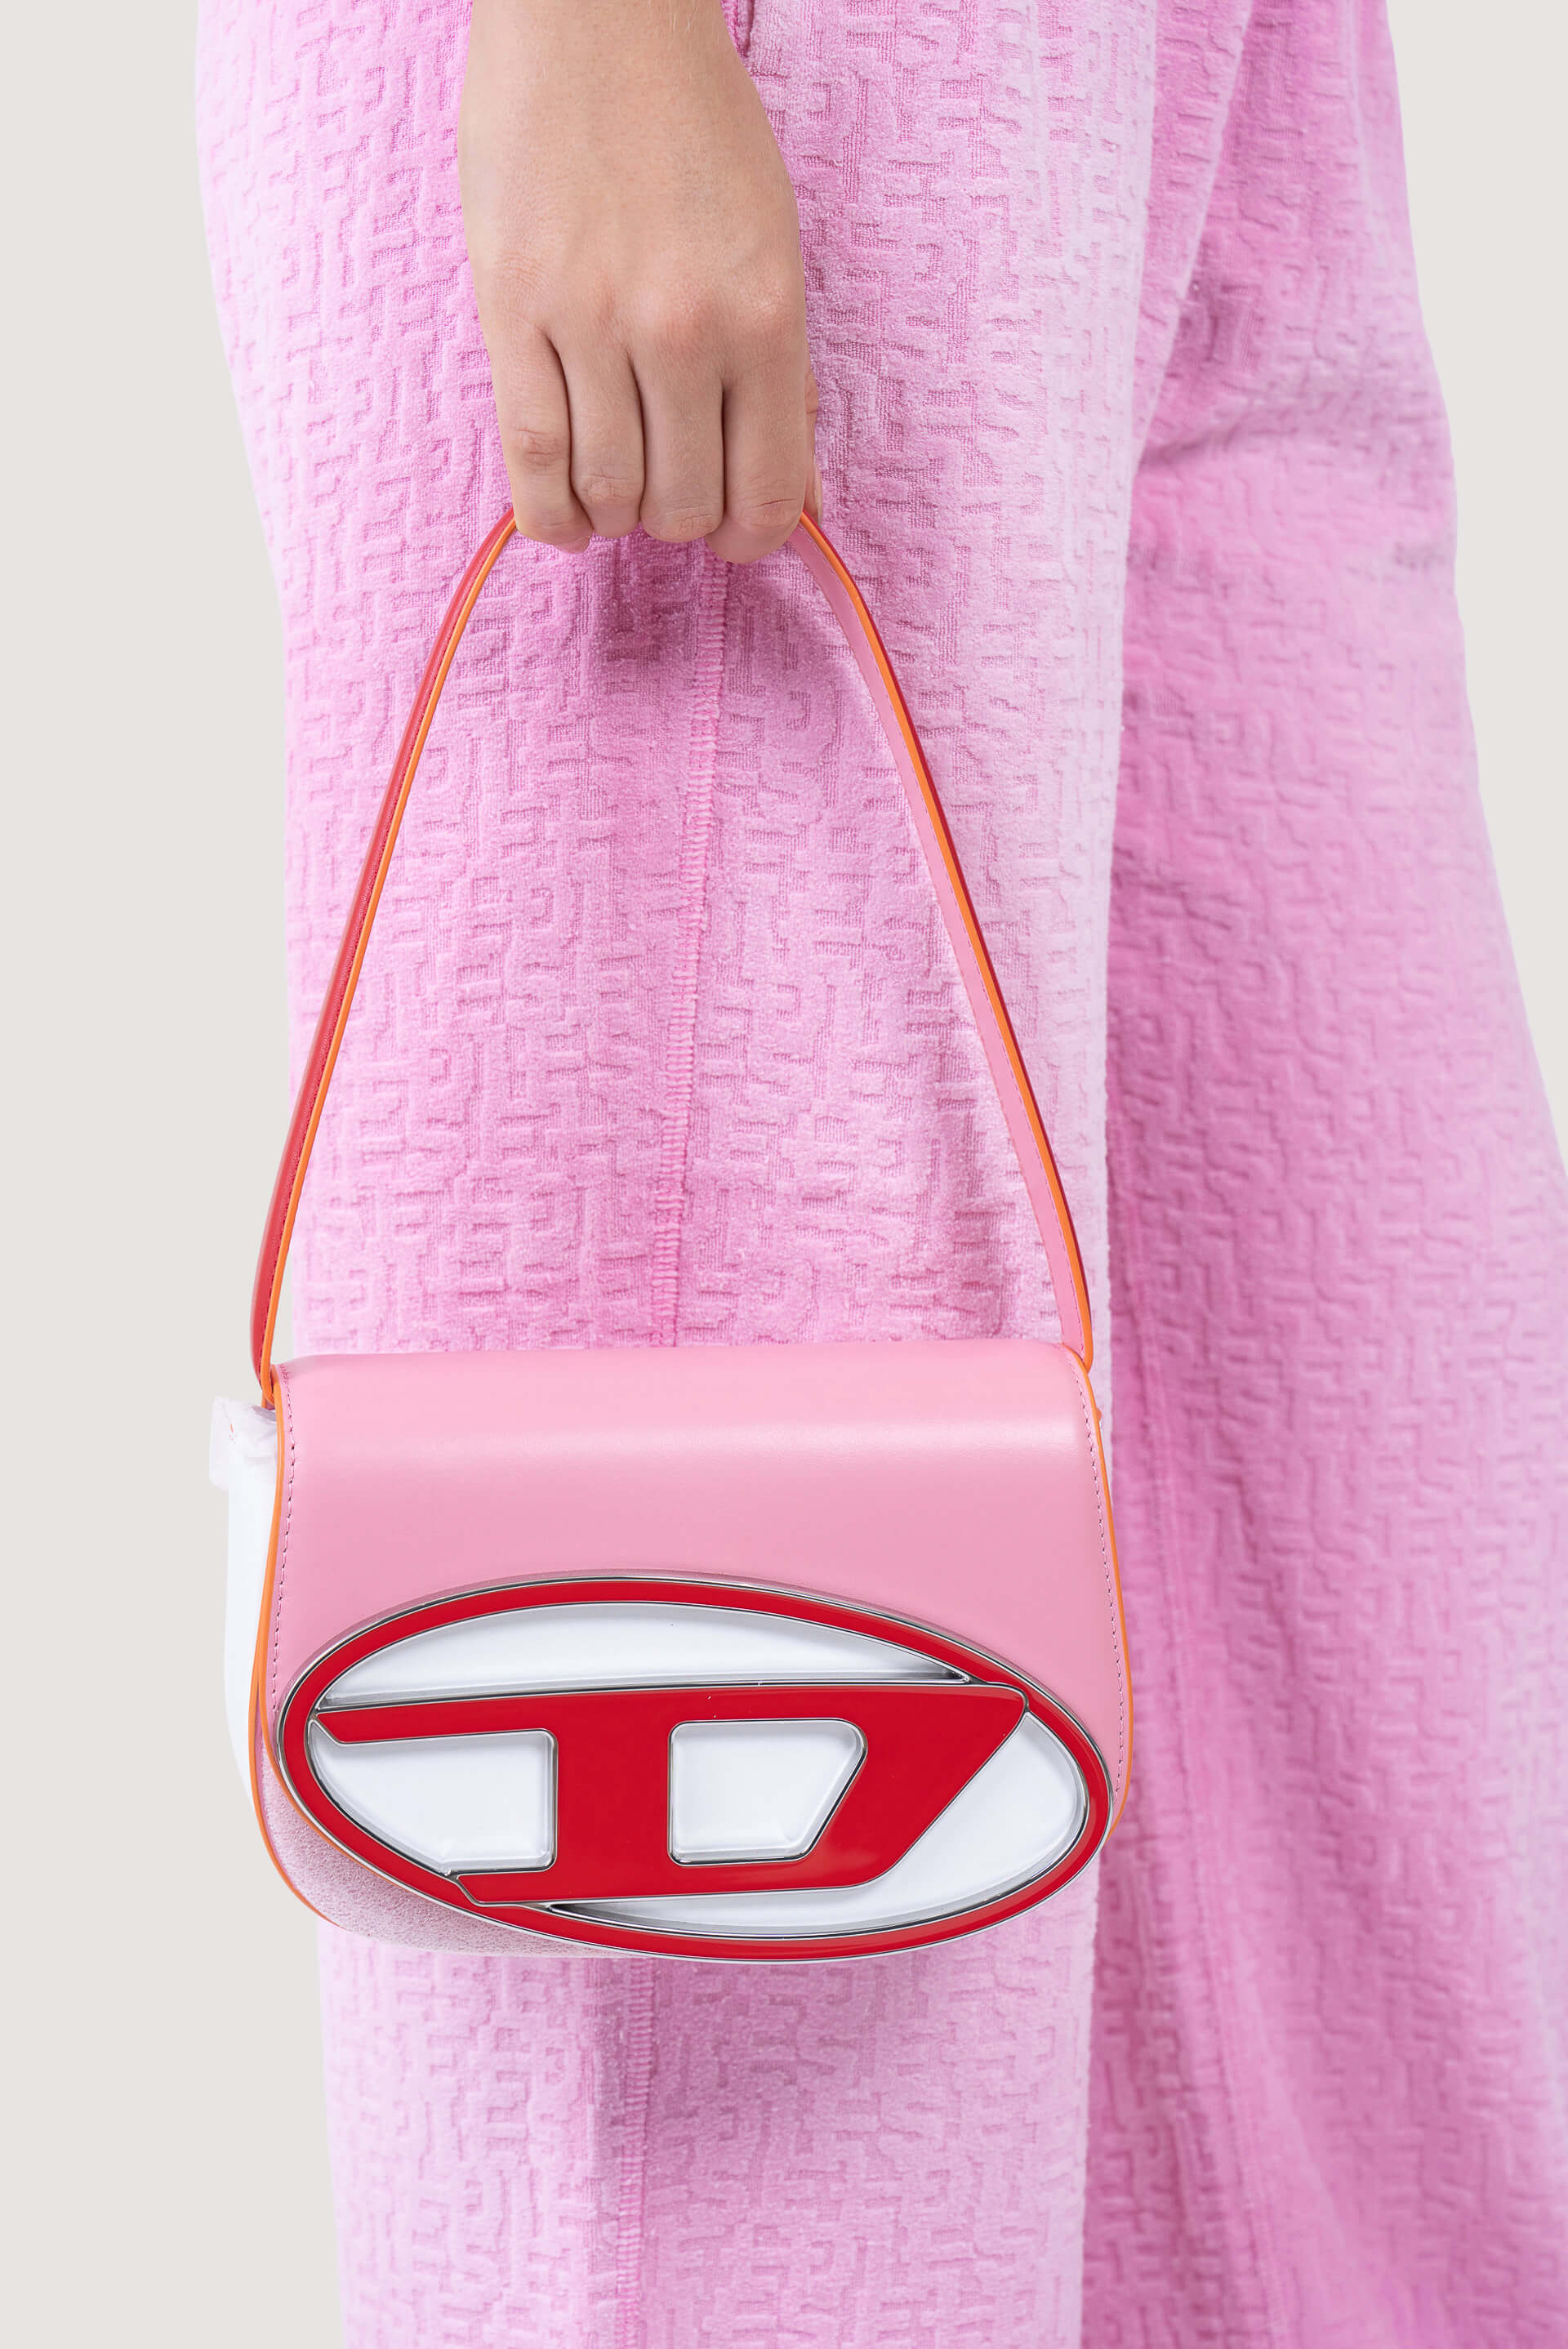 Baguette - Pale pink nappa leather bag